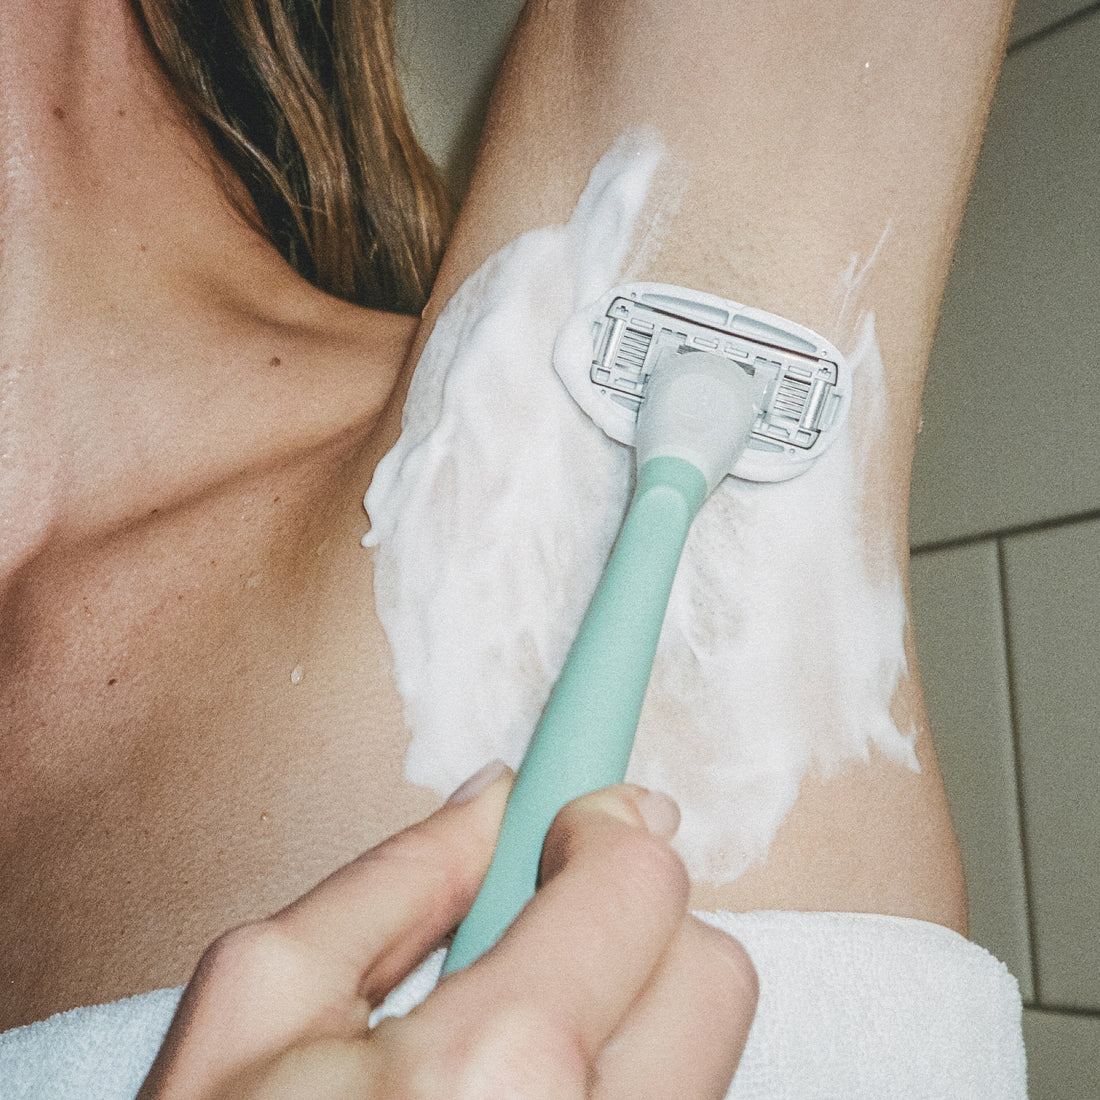 Woman in the shower shaving her shave gel covered armpit area with the Sage Flamingo razor